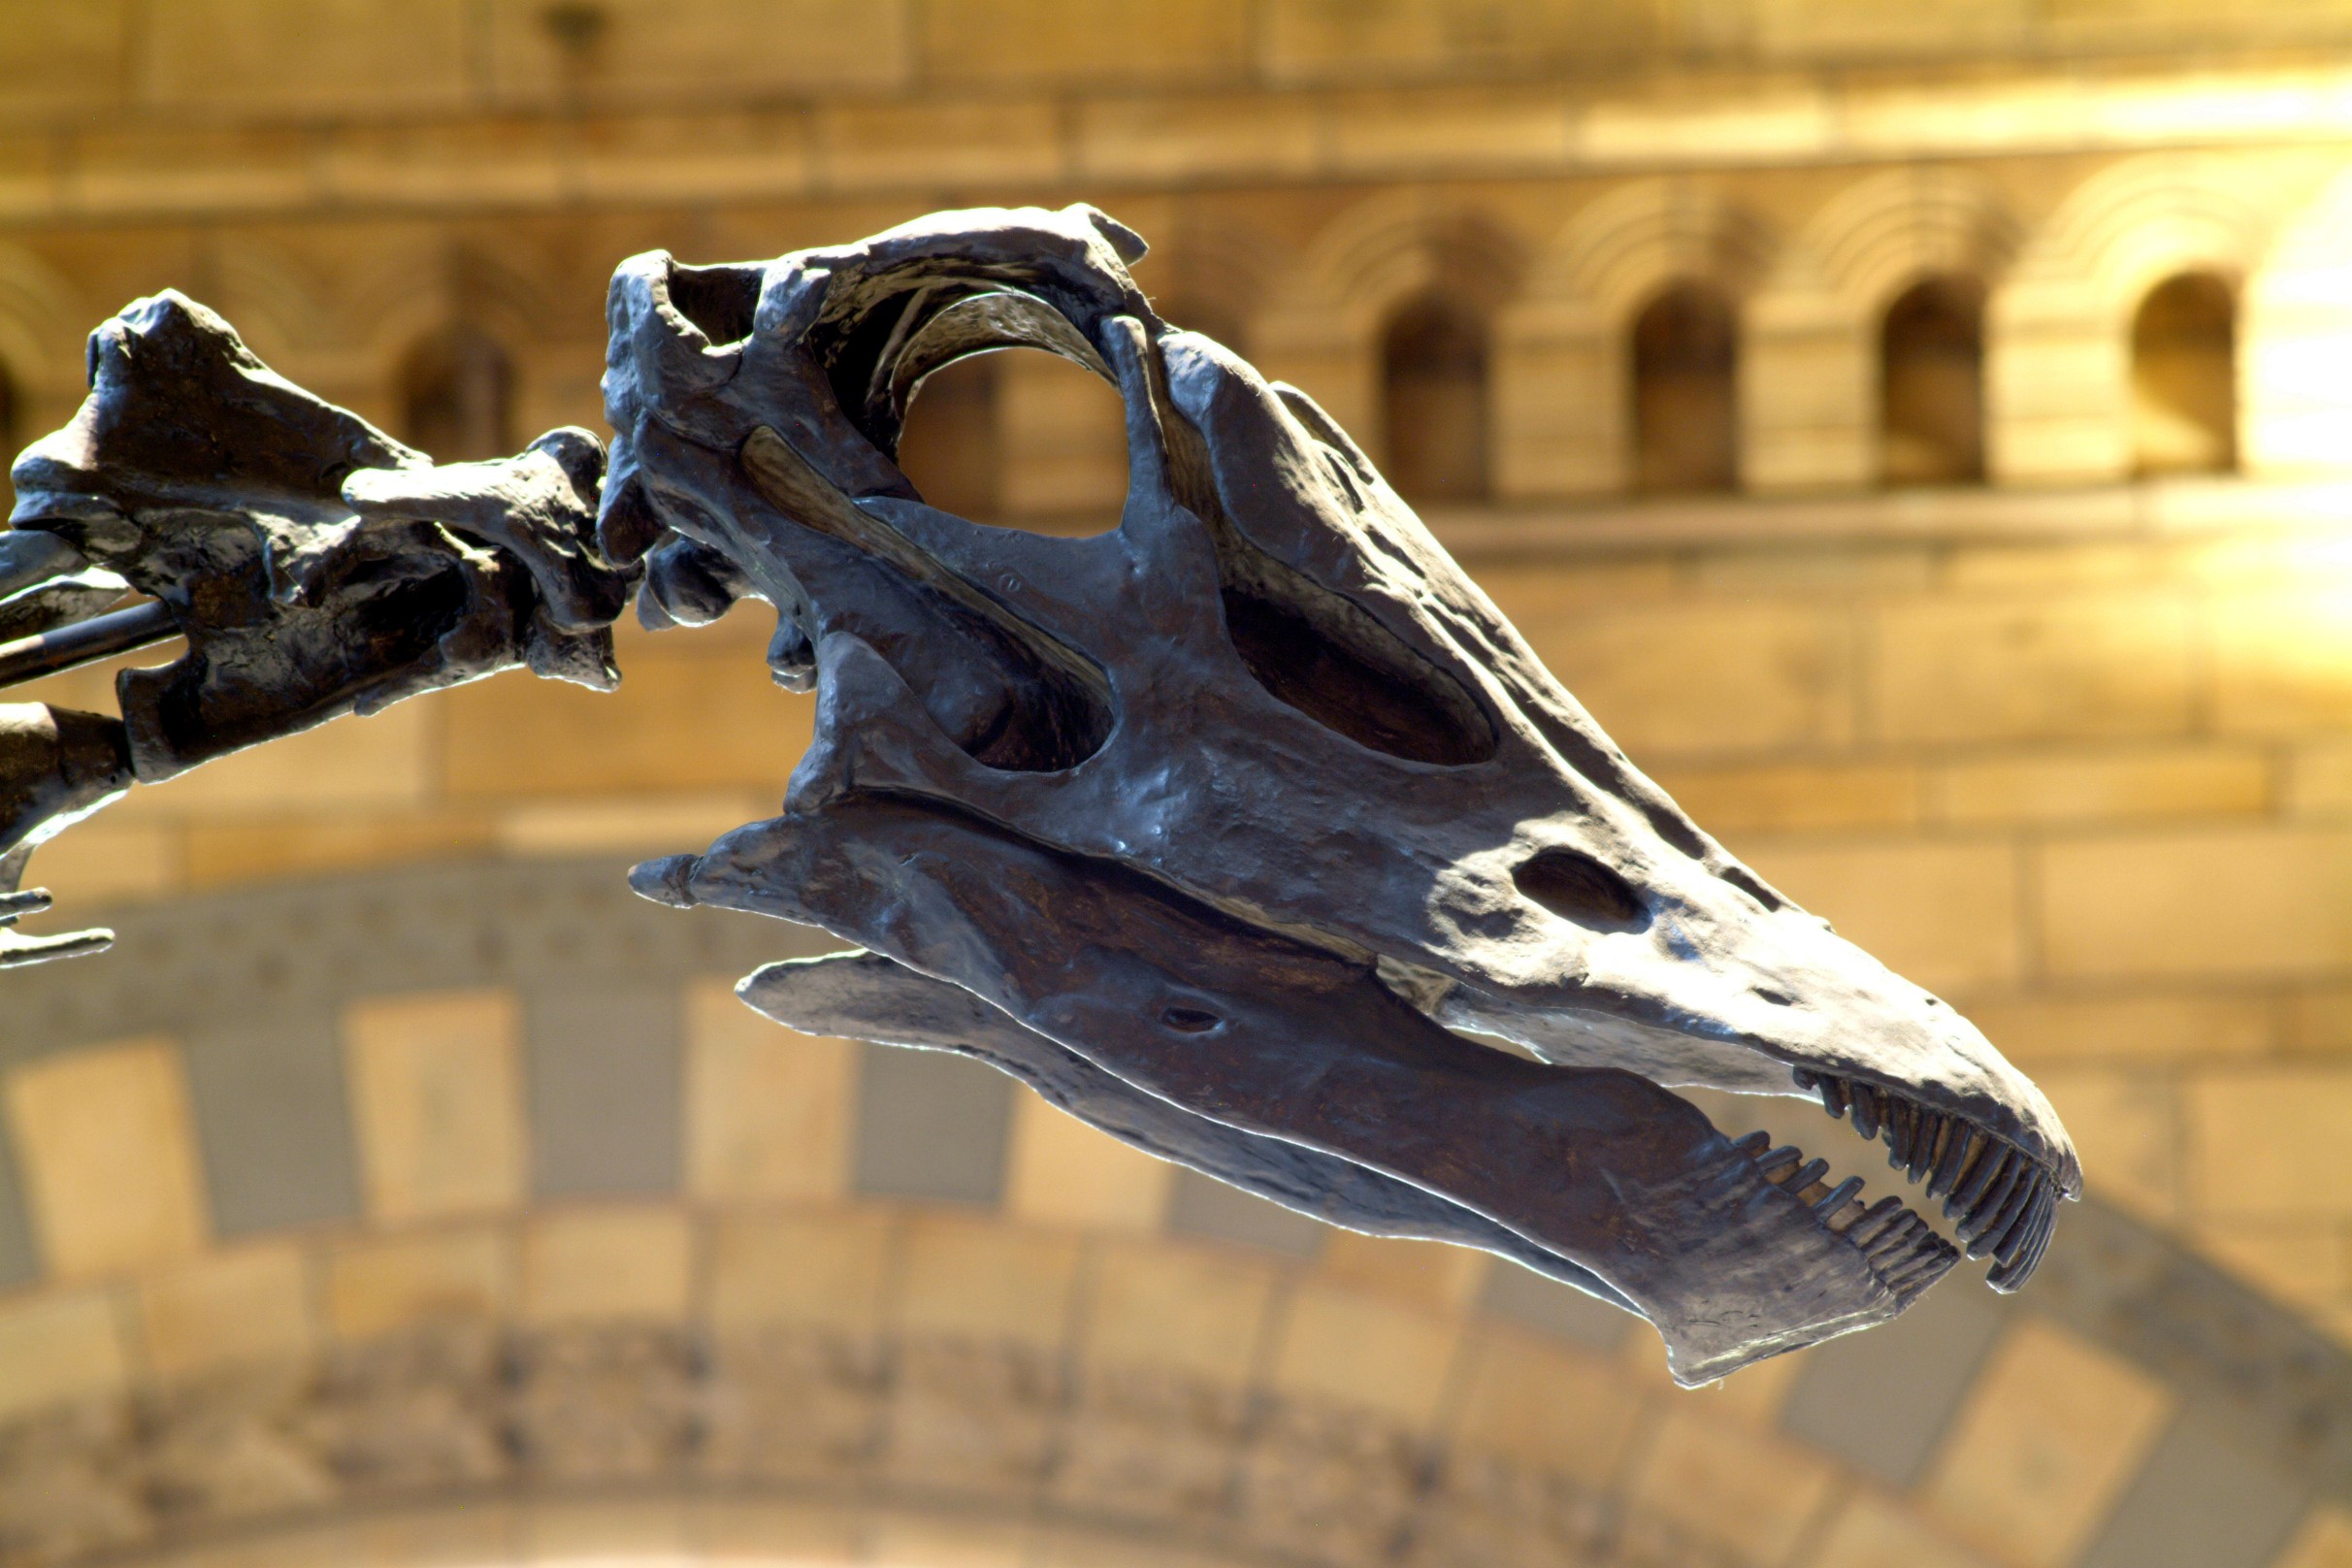 Dippy at the Natural History Museum © Trustees of the Natural History Museum